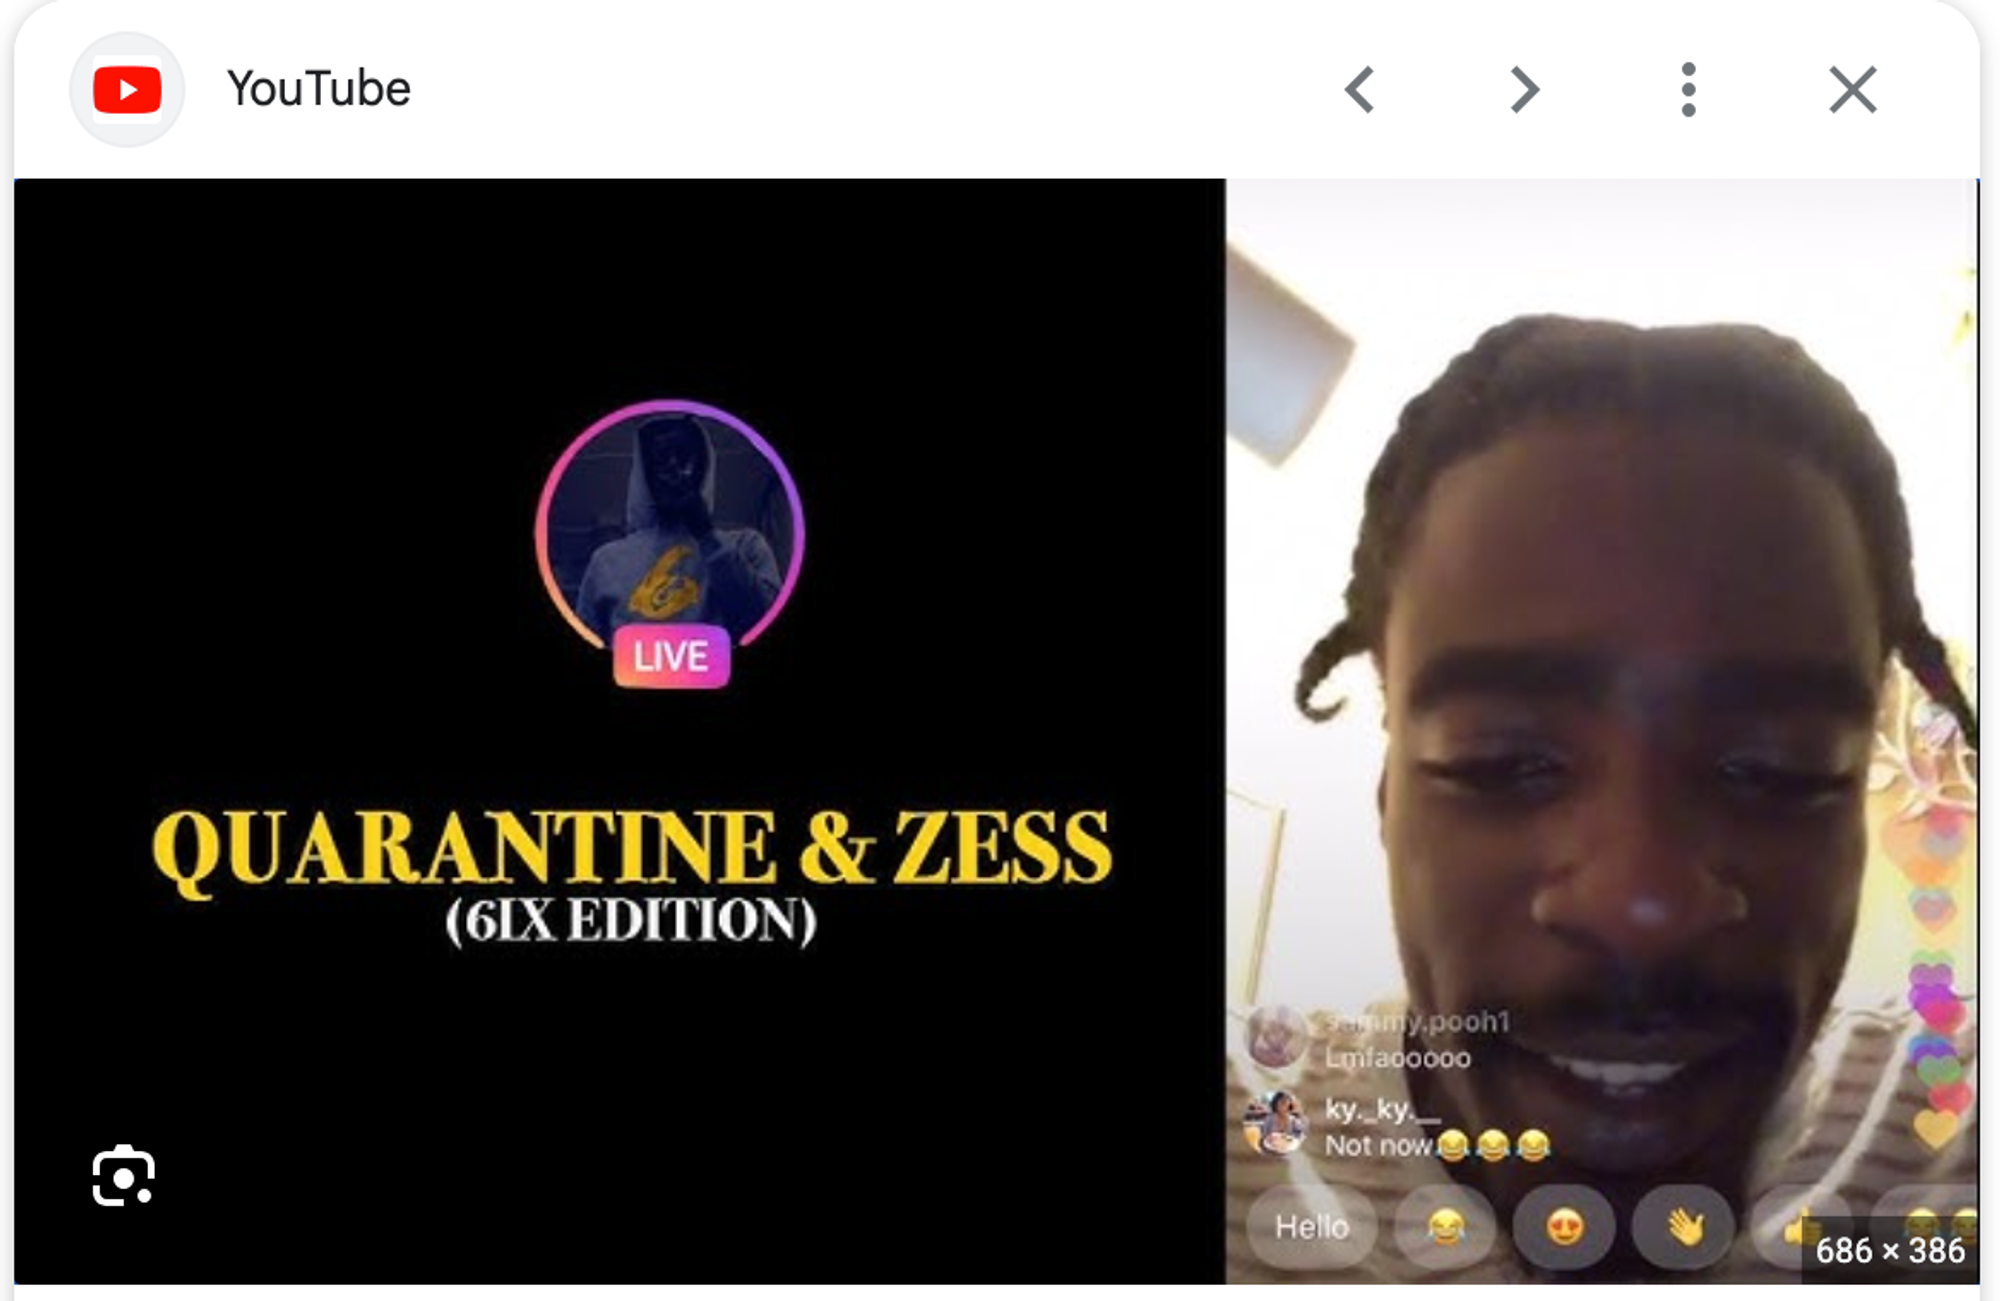 A split screen showing a YouTube live, wherein a man speaks to a crowd of virtual viewers that react with crying laughing emojis and hearts. On the left side, on top of a black background, reads "QUARANTINE & ZESS (6IX EDITION)"